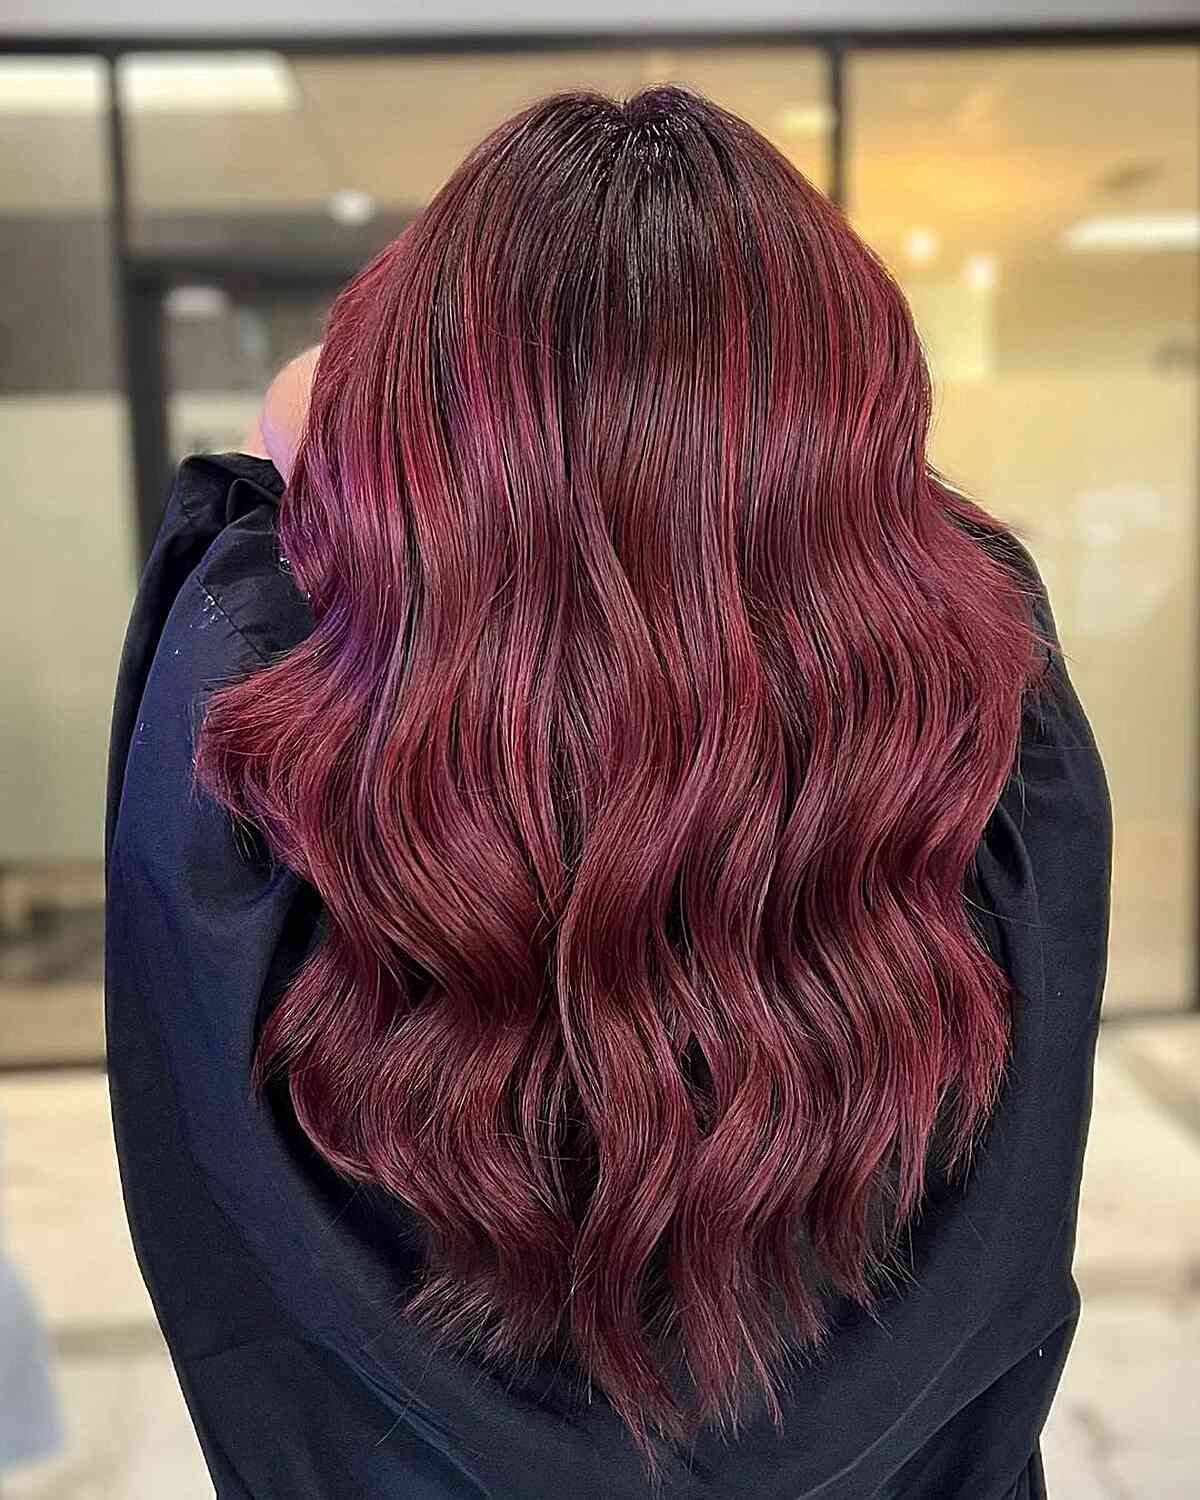 Electrica Red-Adore Crimson Hair Color-Cardi-B inspired - YouTube